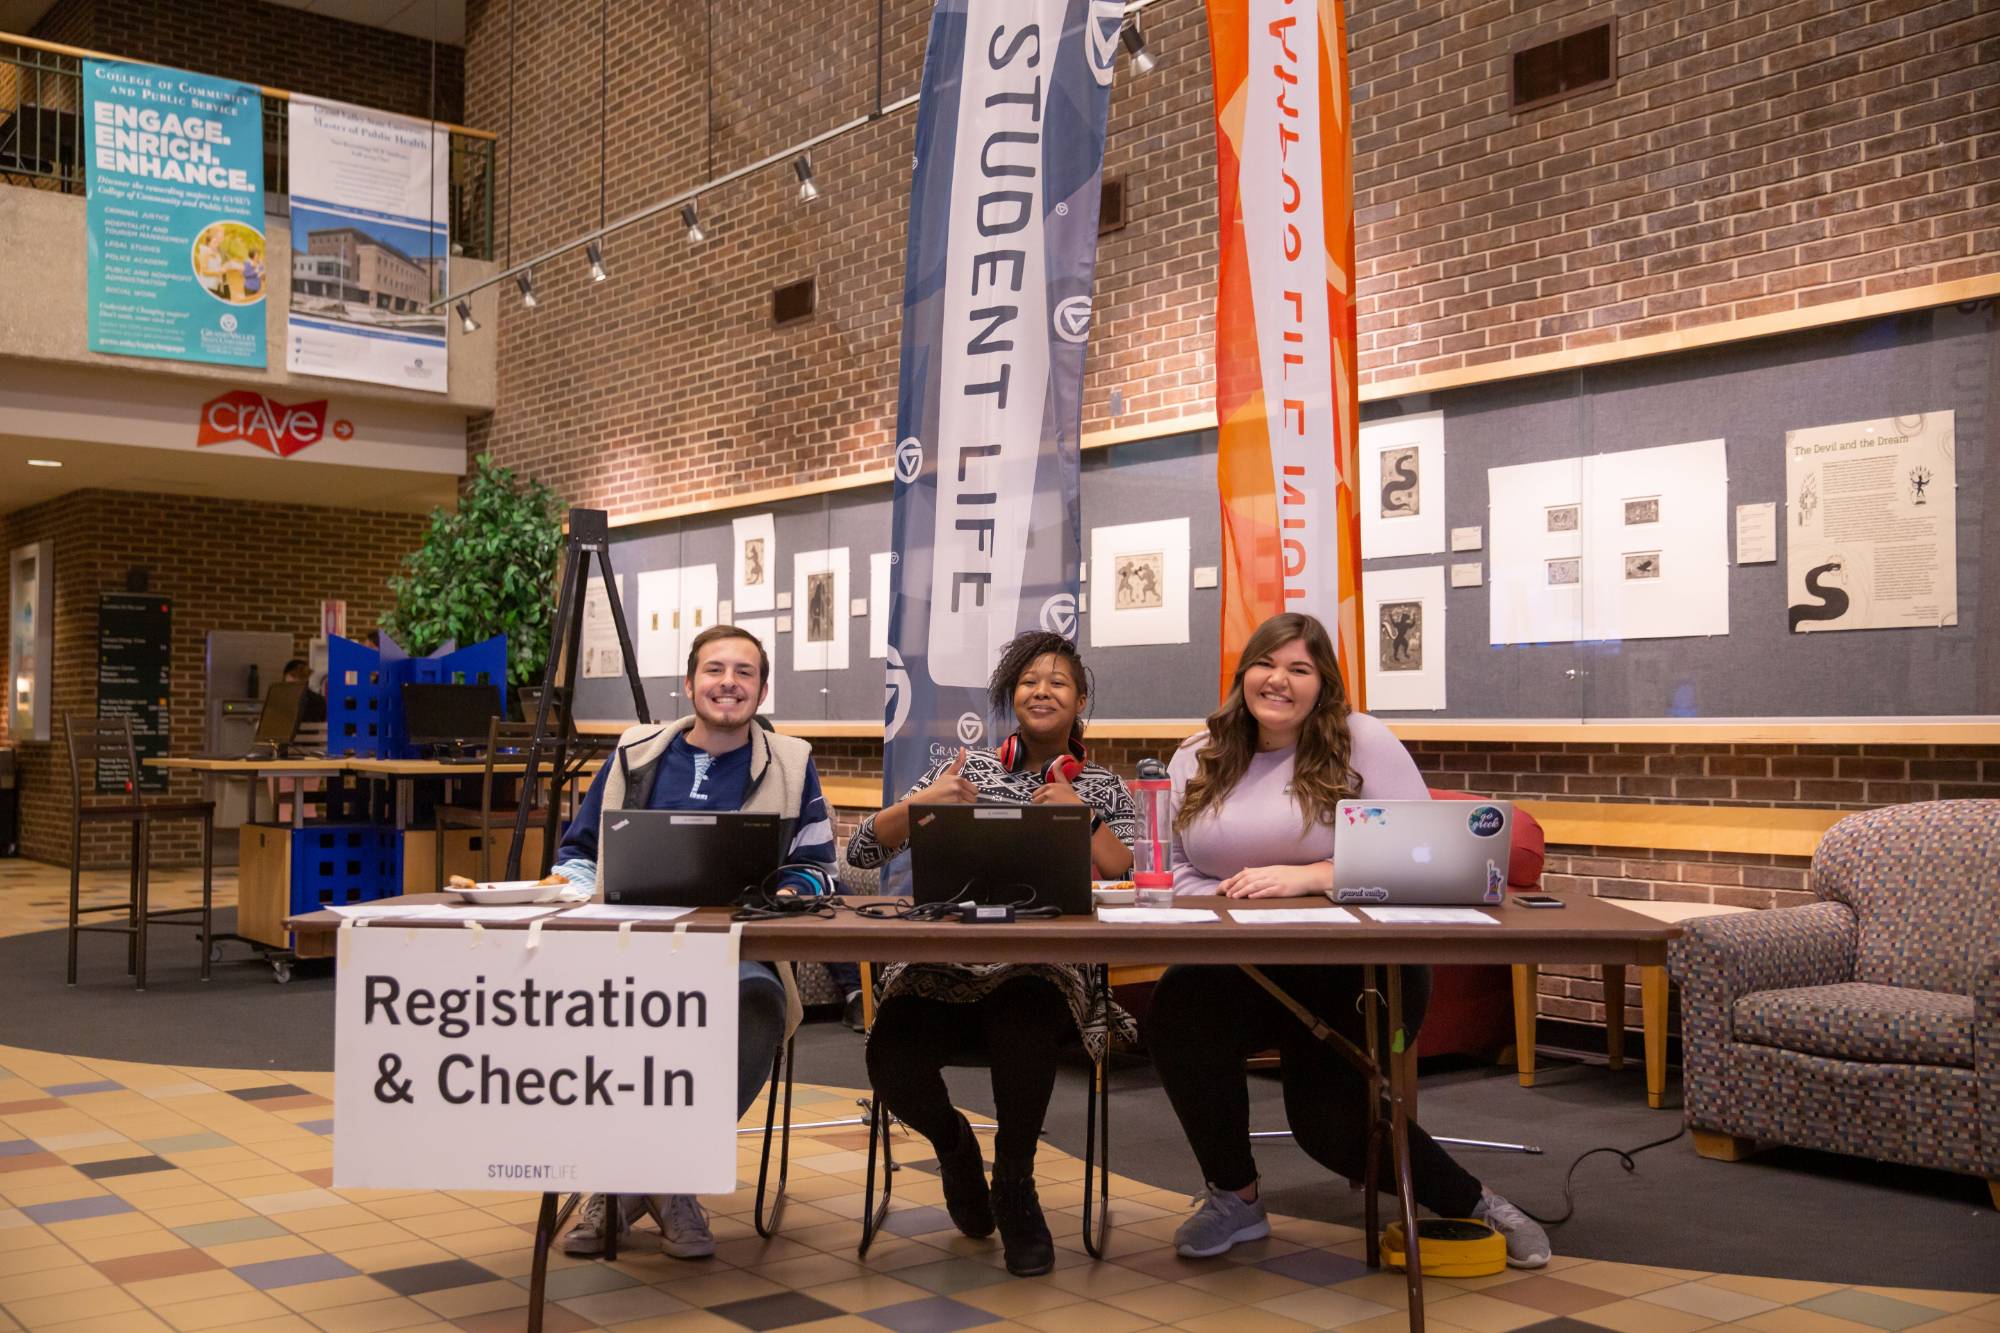 Registration and Sign up table at Winter Campus Life Night